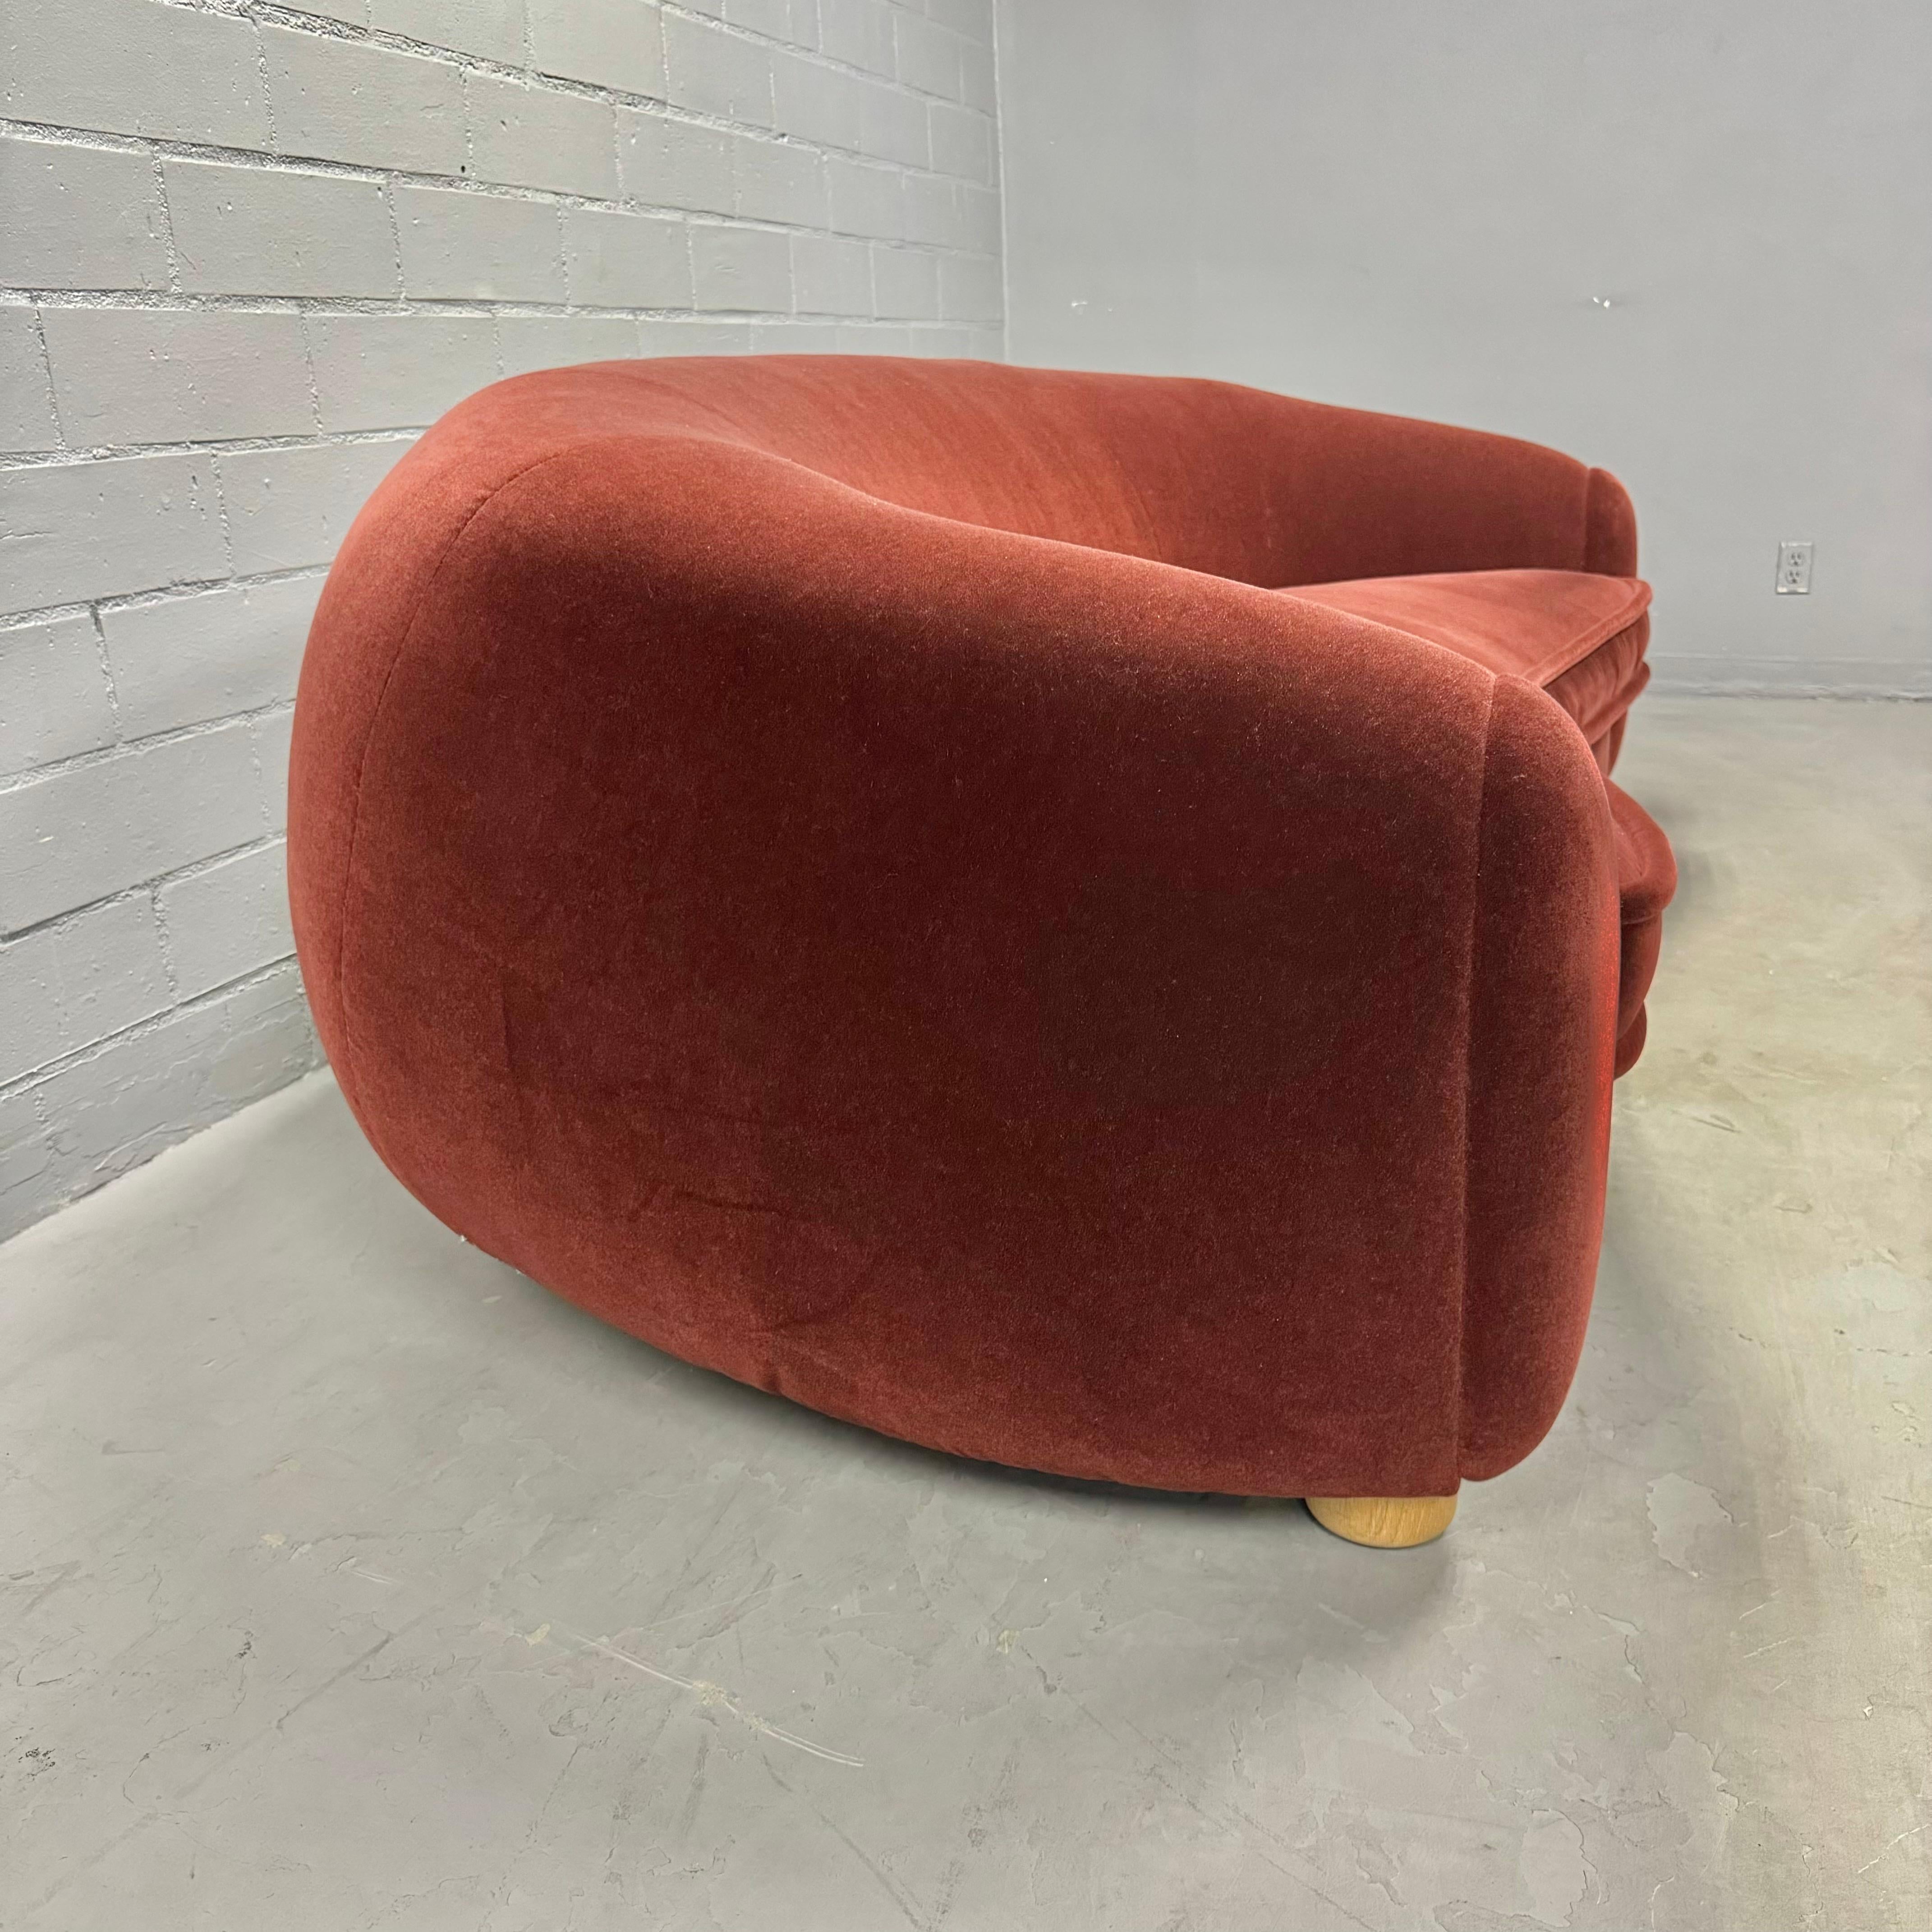 Hand-Crafted Polar Bear Sofa in the Style of Jean Royère, 2000s USA For Sale